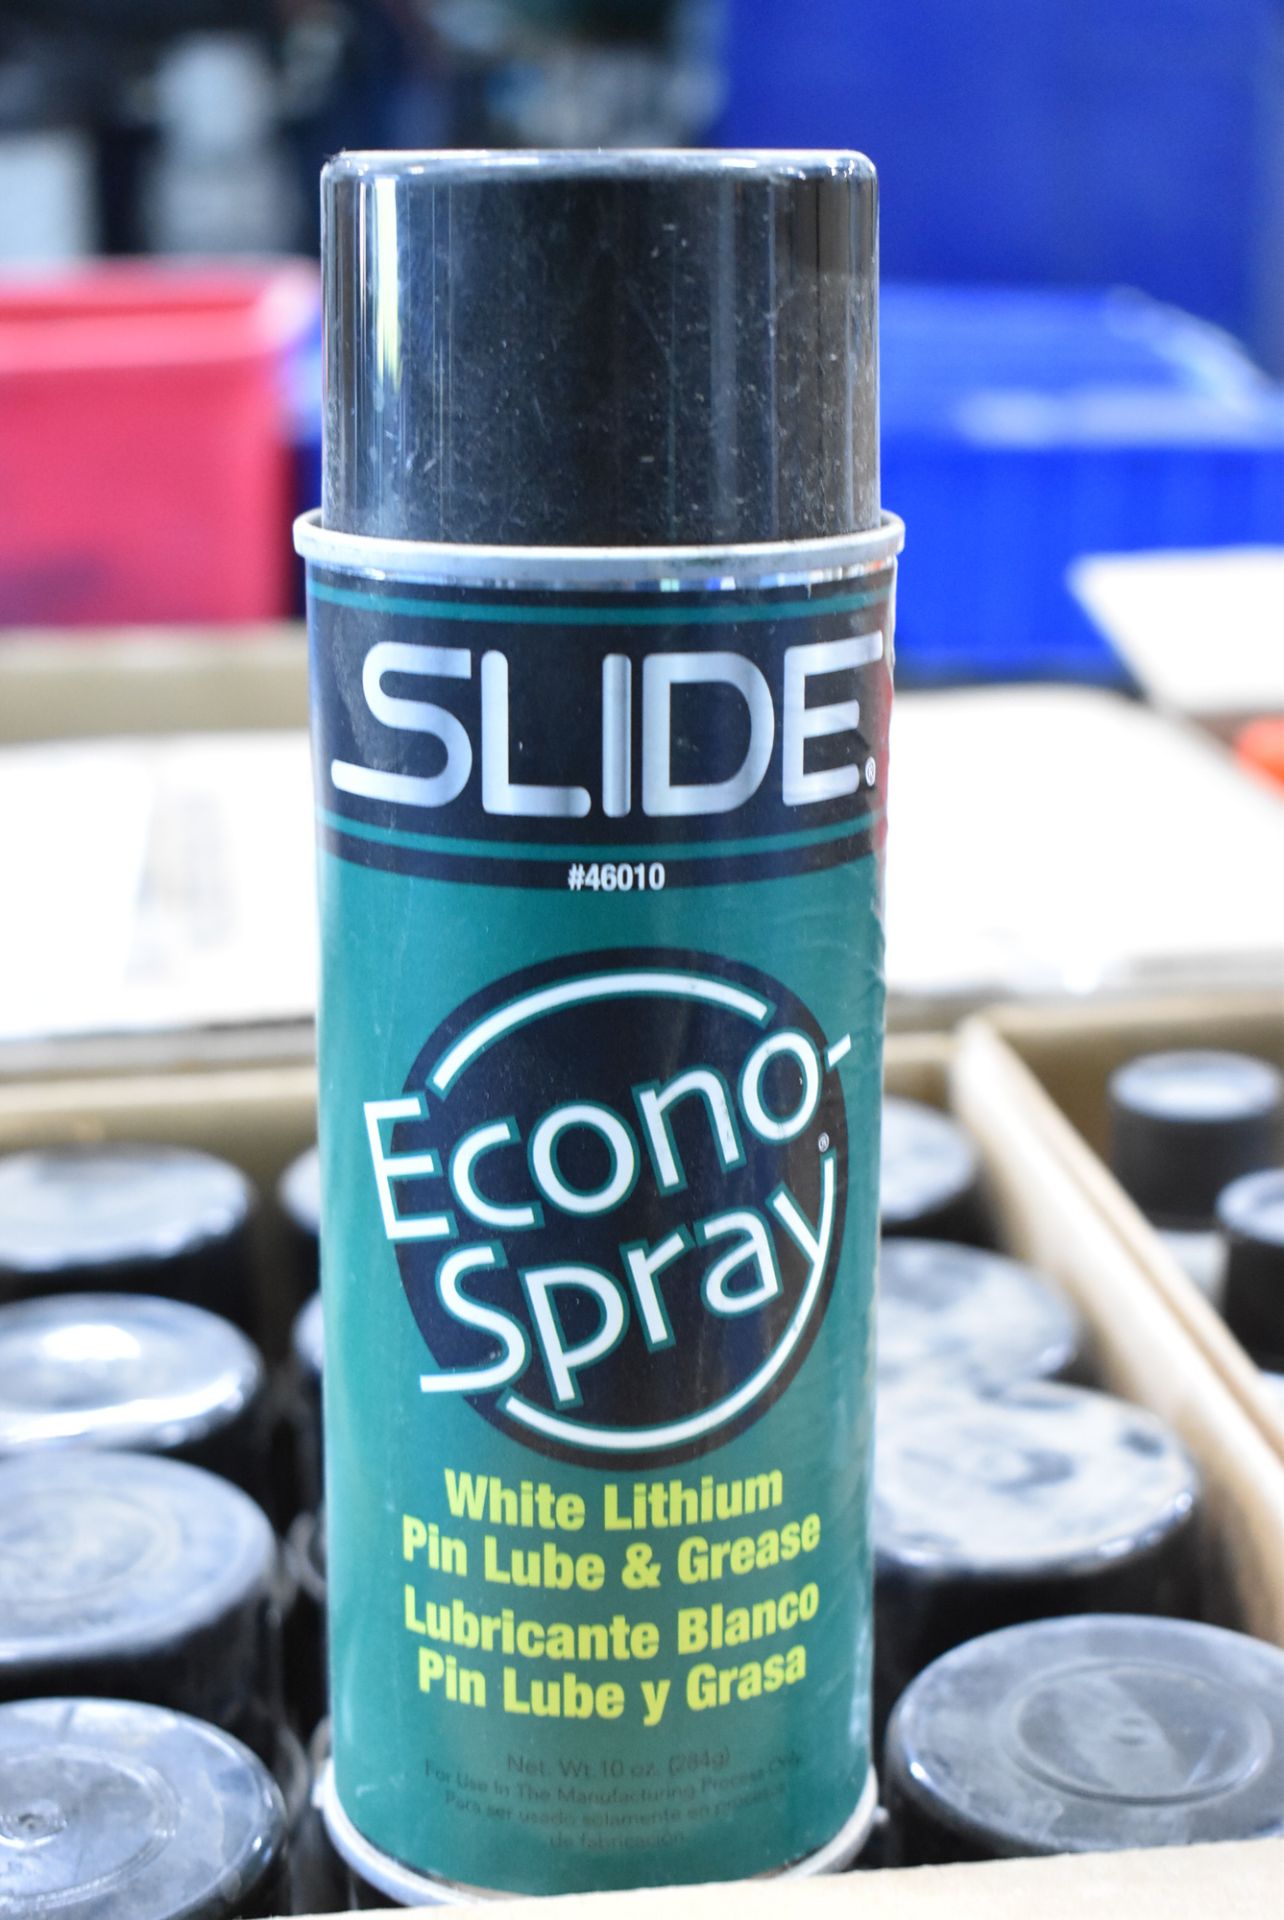 LOT/ SKID WITH SLIDE MOULD SHIELD RUST PROTECTOR & SLIDE ECONO-SPRAY WHITE LITHIUM PIN LUBE/GREASE - Image 7 of 8